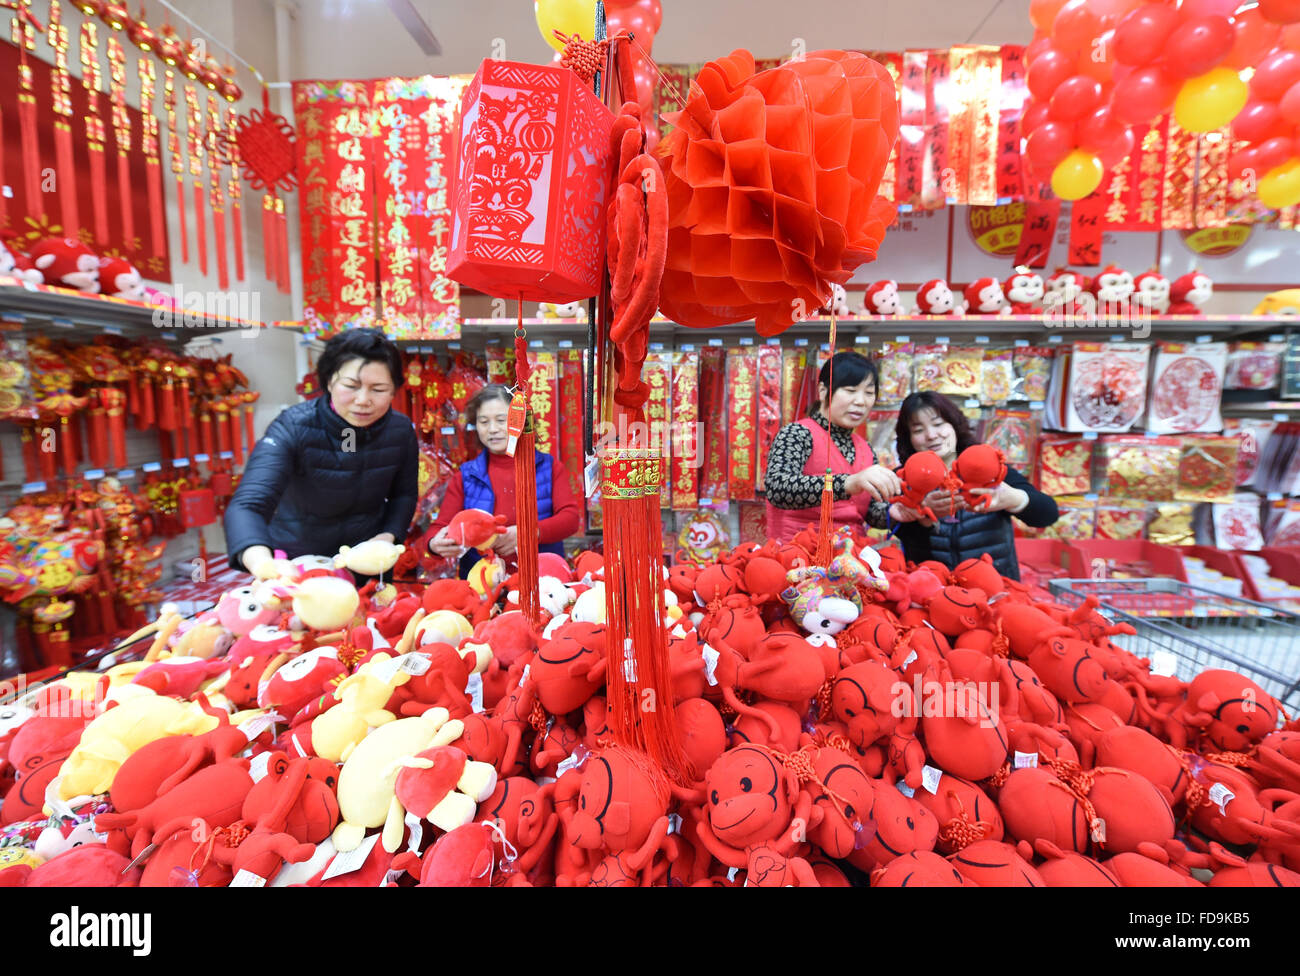 Nanjing, Many supermarkets and shopping malls in Nanjing opened special shopping area for commodities for Spring Festival. 8th Feb, 2016. Local residents select ornaments for the coming Spring Festival at a supermarket in Nanjing, capital of east China's Jiangsu Province, Jan. 29, 2016. Many supermarkets and shopping malls in Nanjing opened special shopping area for commodities for Spring Festival, which will fall on Feb. 8, 2016. © Sun Can/Xinhua/Alamy Live News Stock Photo